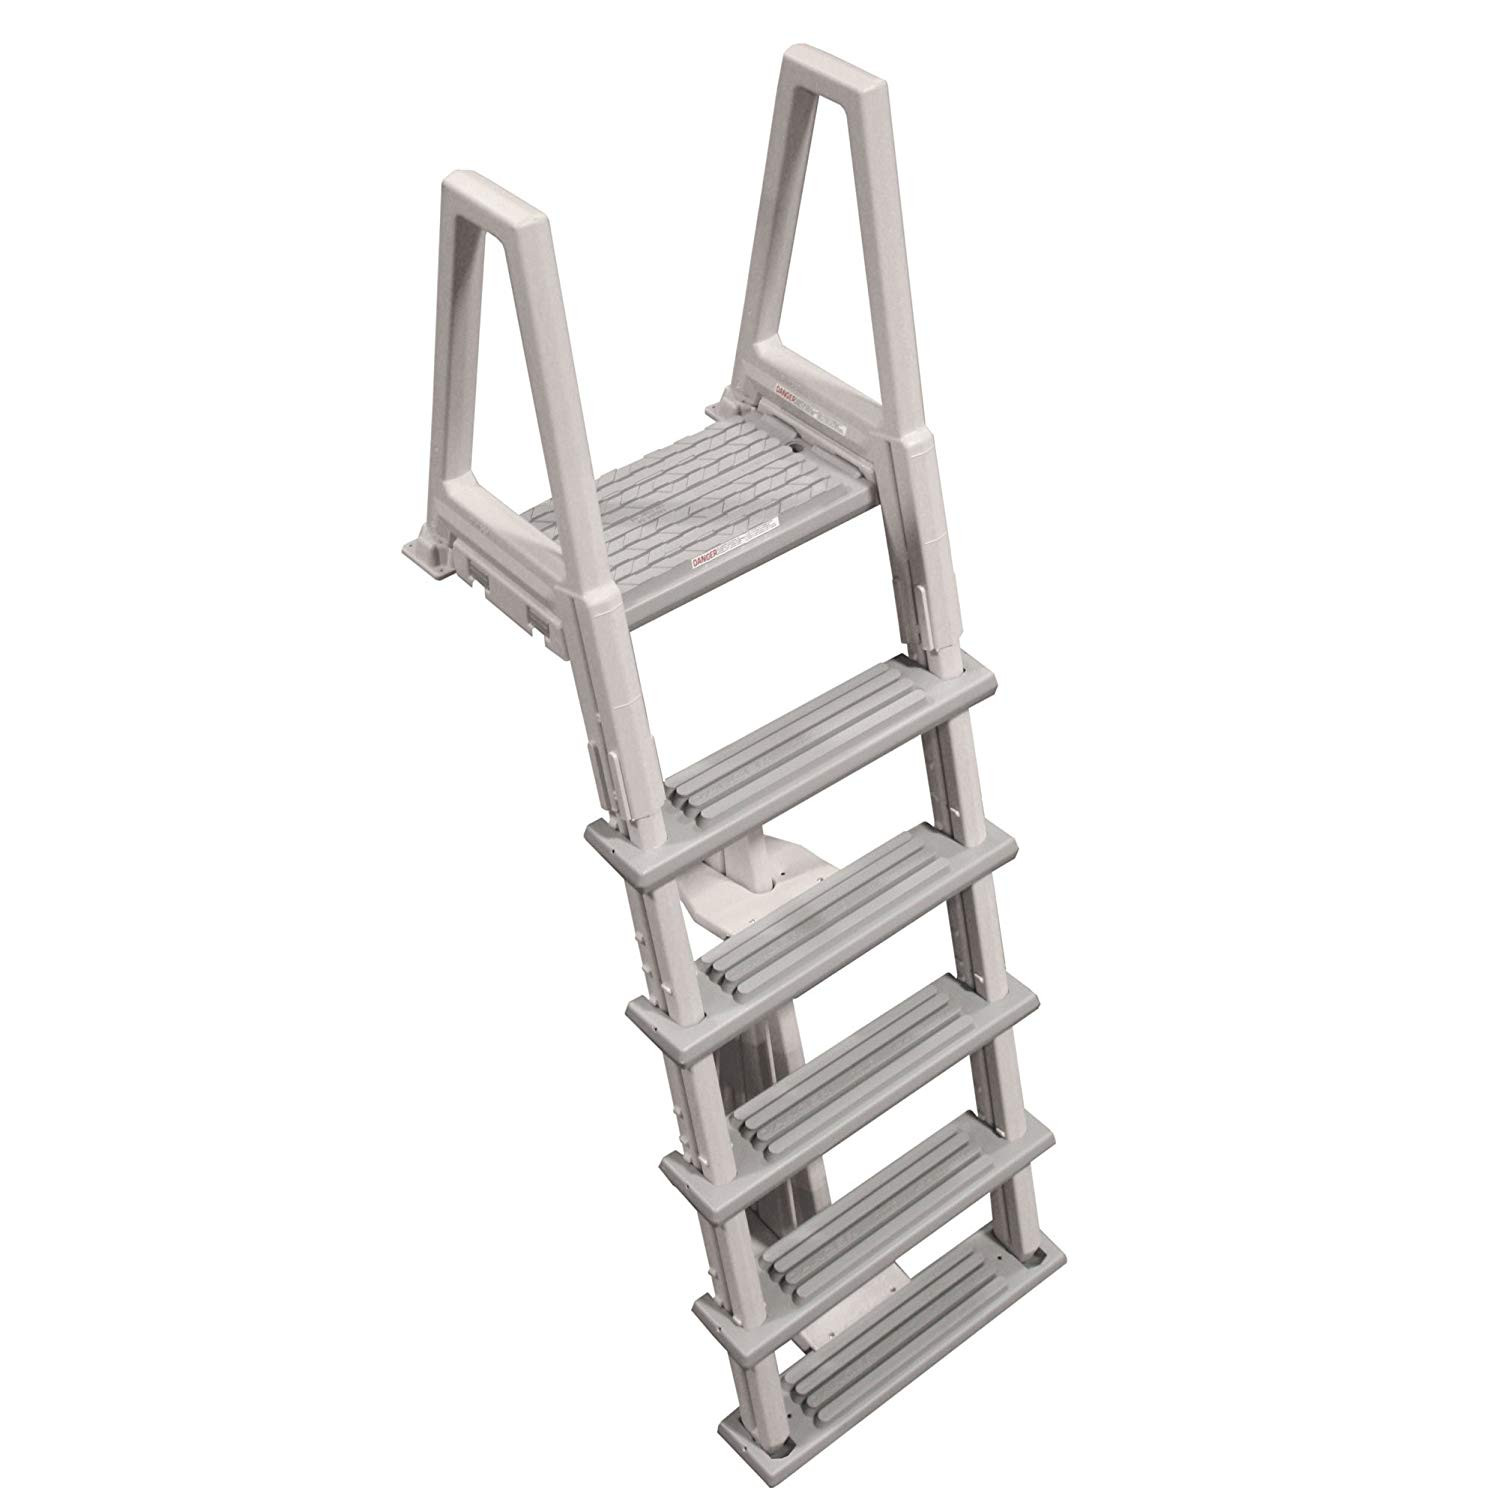 Above Ground Pool Ladders
 Best Ground Pool Ladders and Staircases Reviews 2019